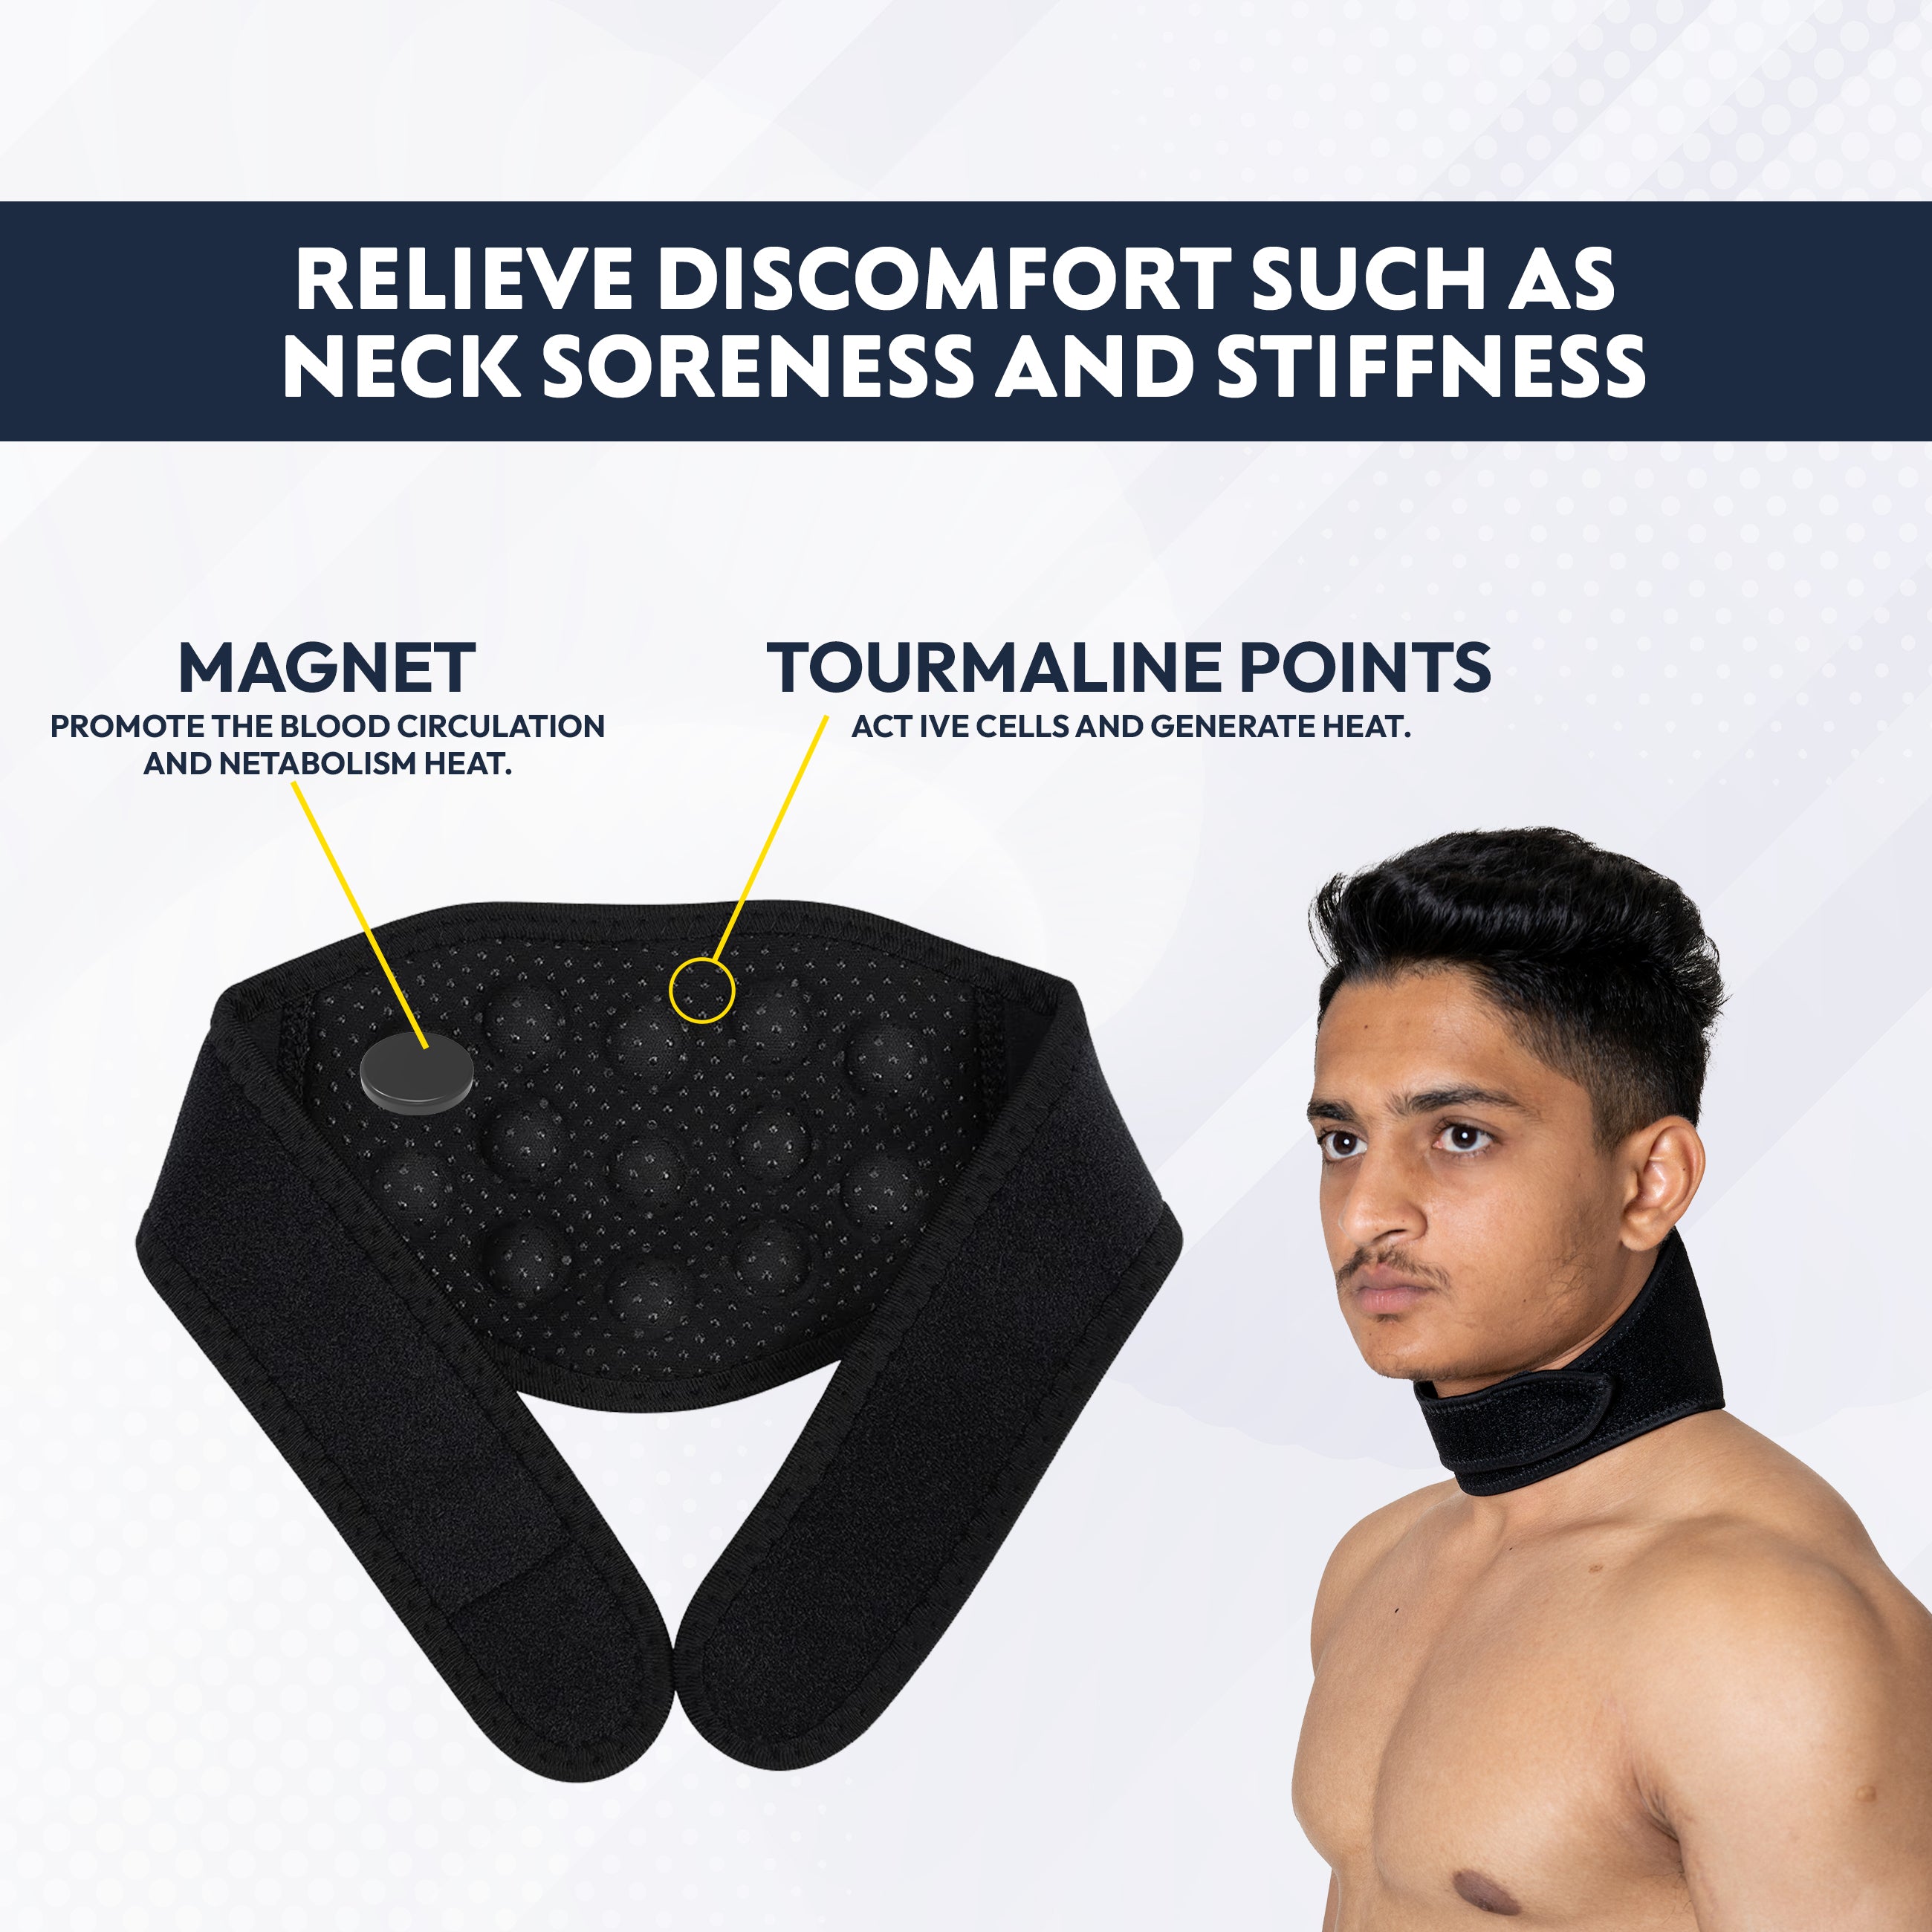 I5Joints-Magnetic Therapy Neck Support with Infrared Heat(I5Joints Neck Infrared Heat Neck Support, Adjustable Neck Brace With Extra Support, Relieves Pain, Stress & Pressure in Spine)